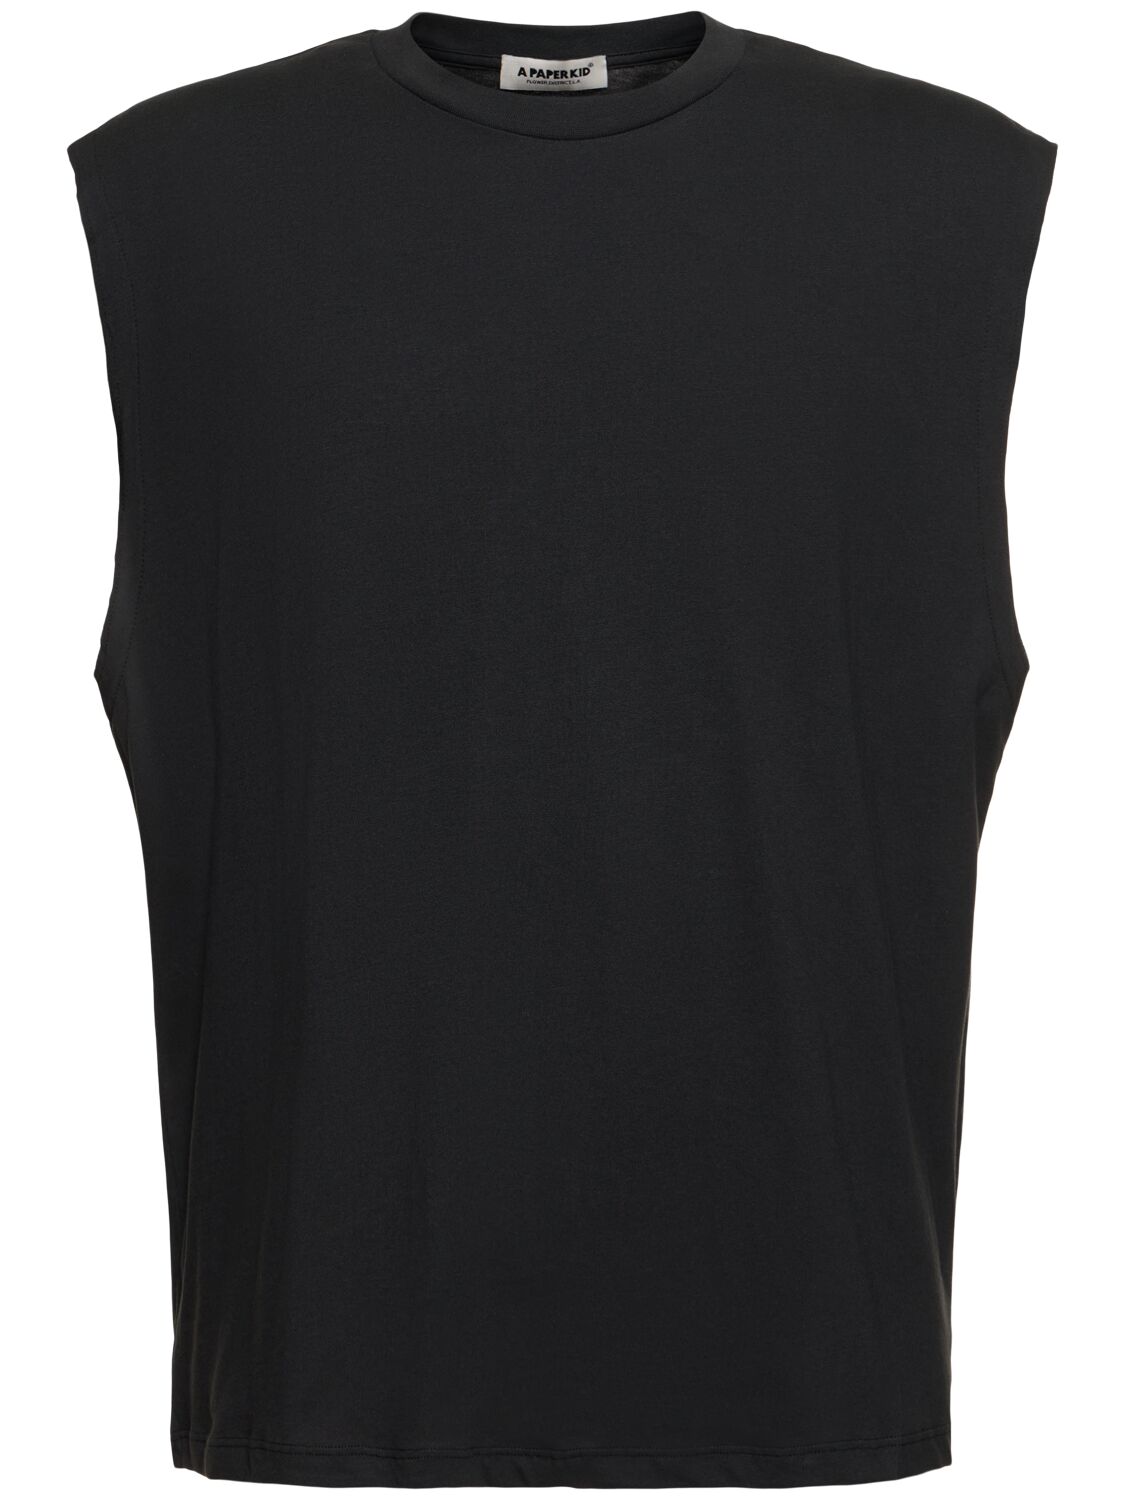 Image of Unisex Tank Top W/ Pearls